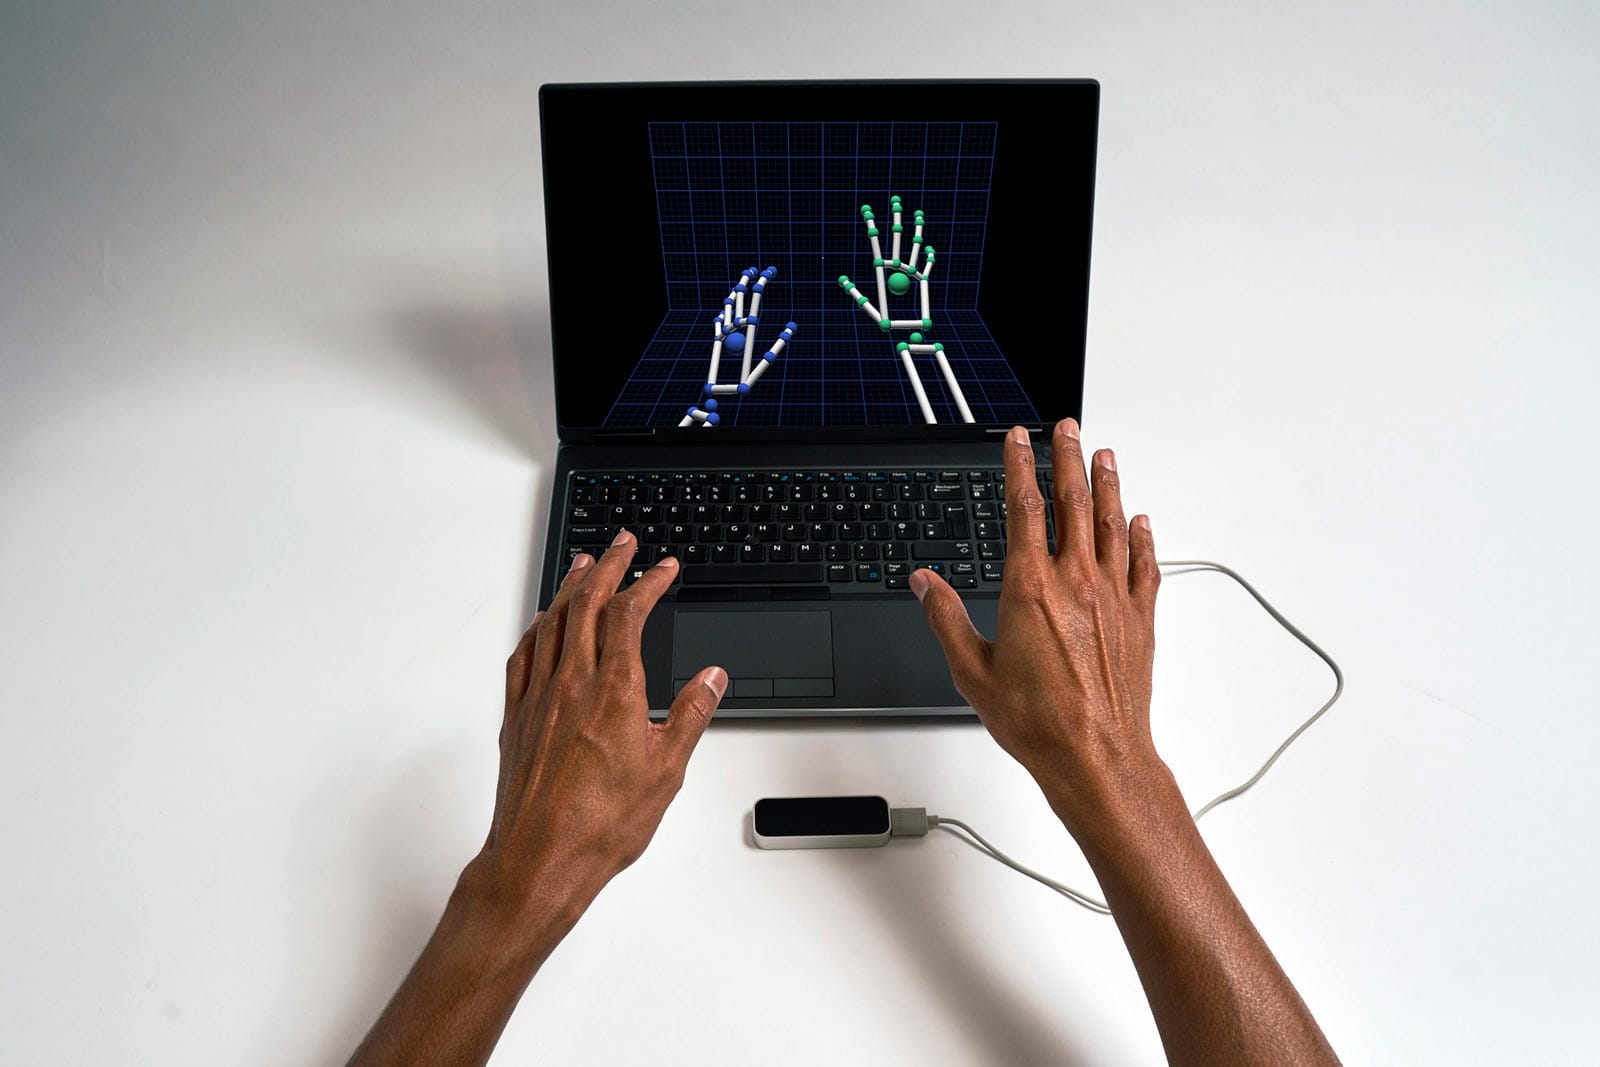 Leap Motion Controller and laptop